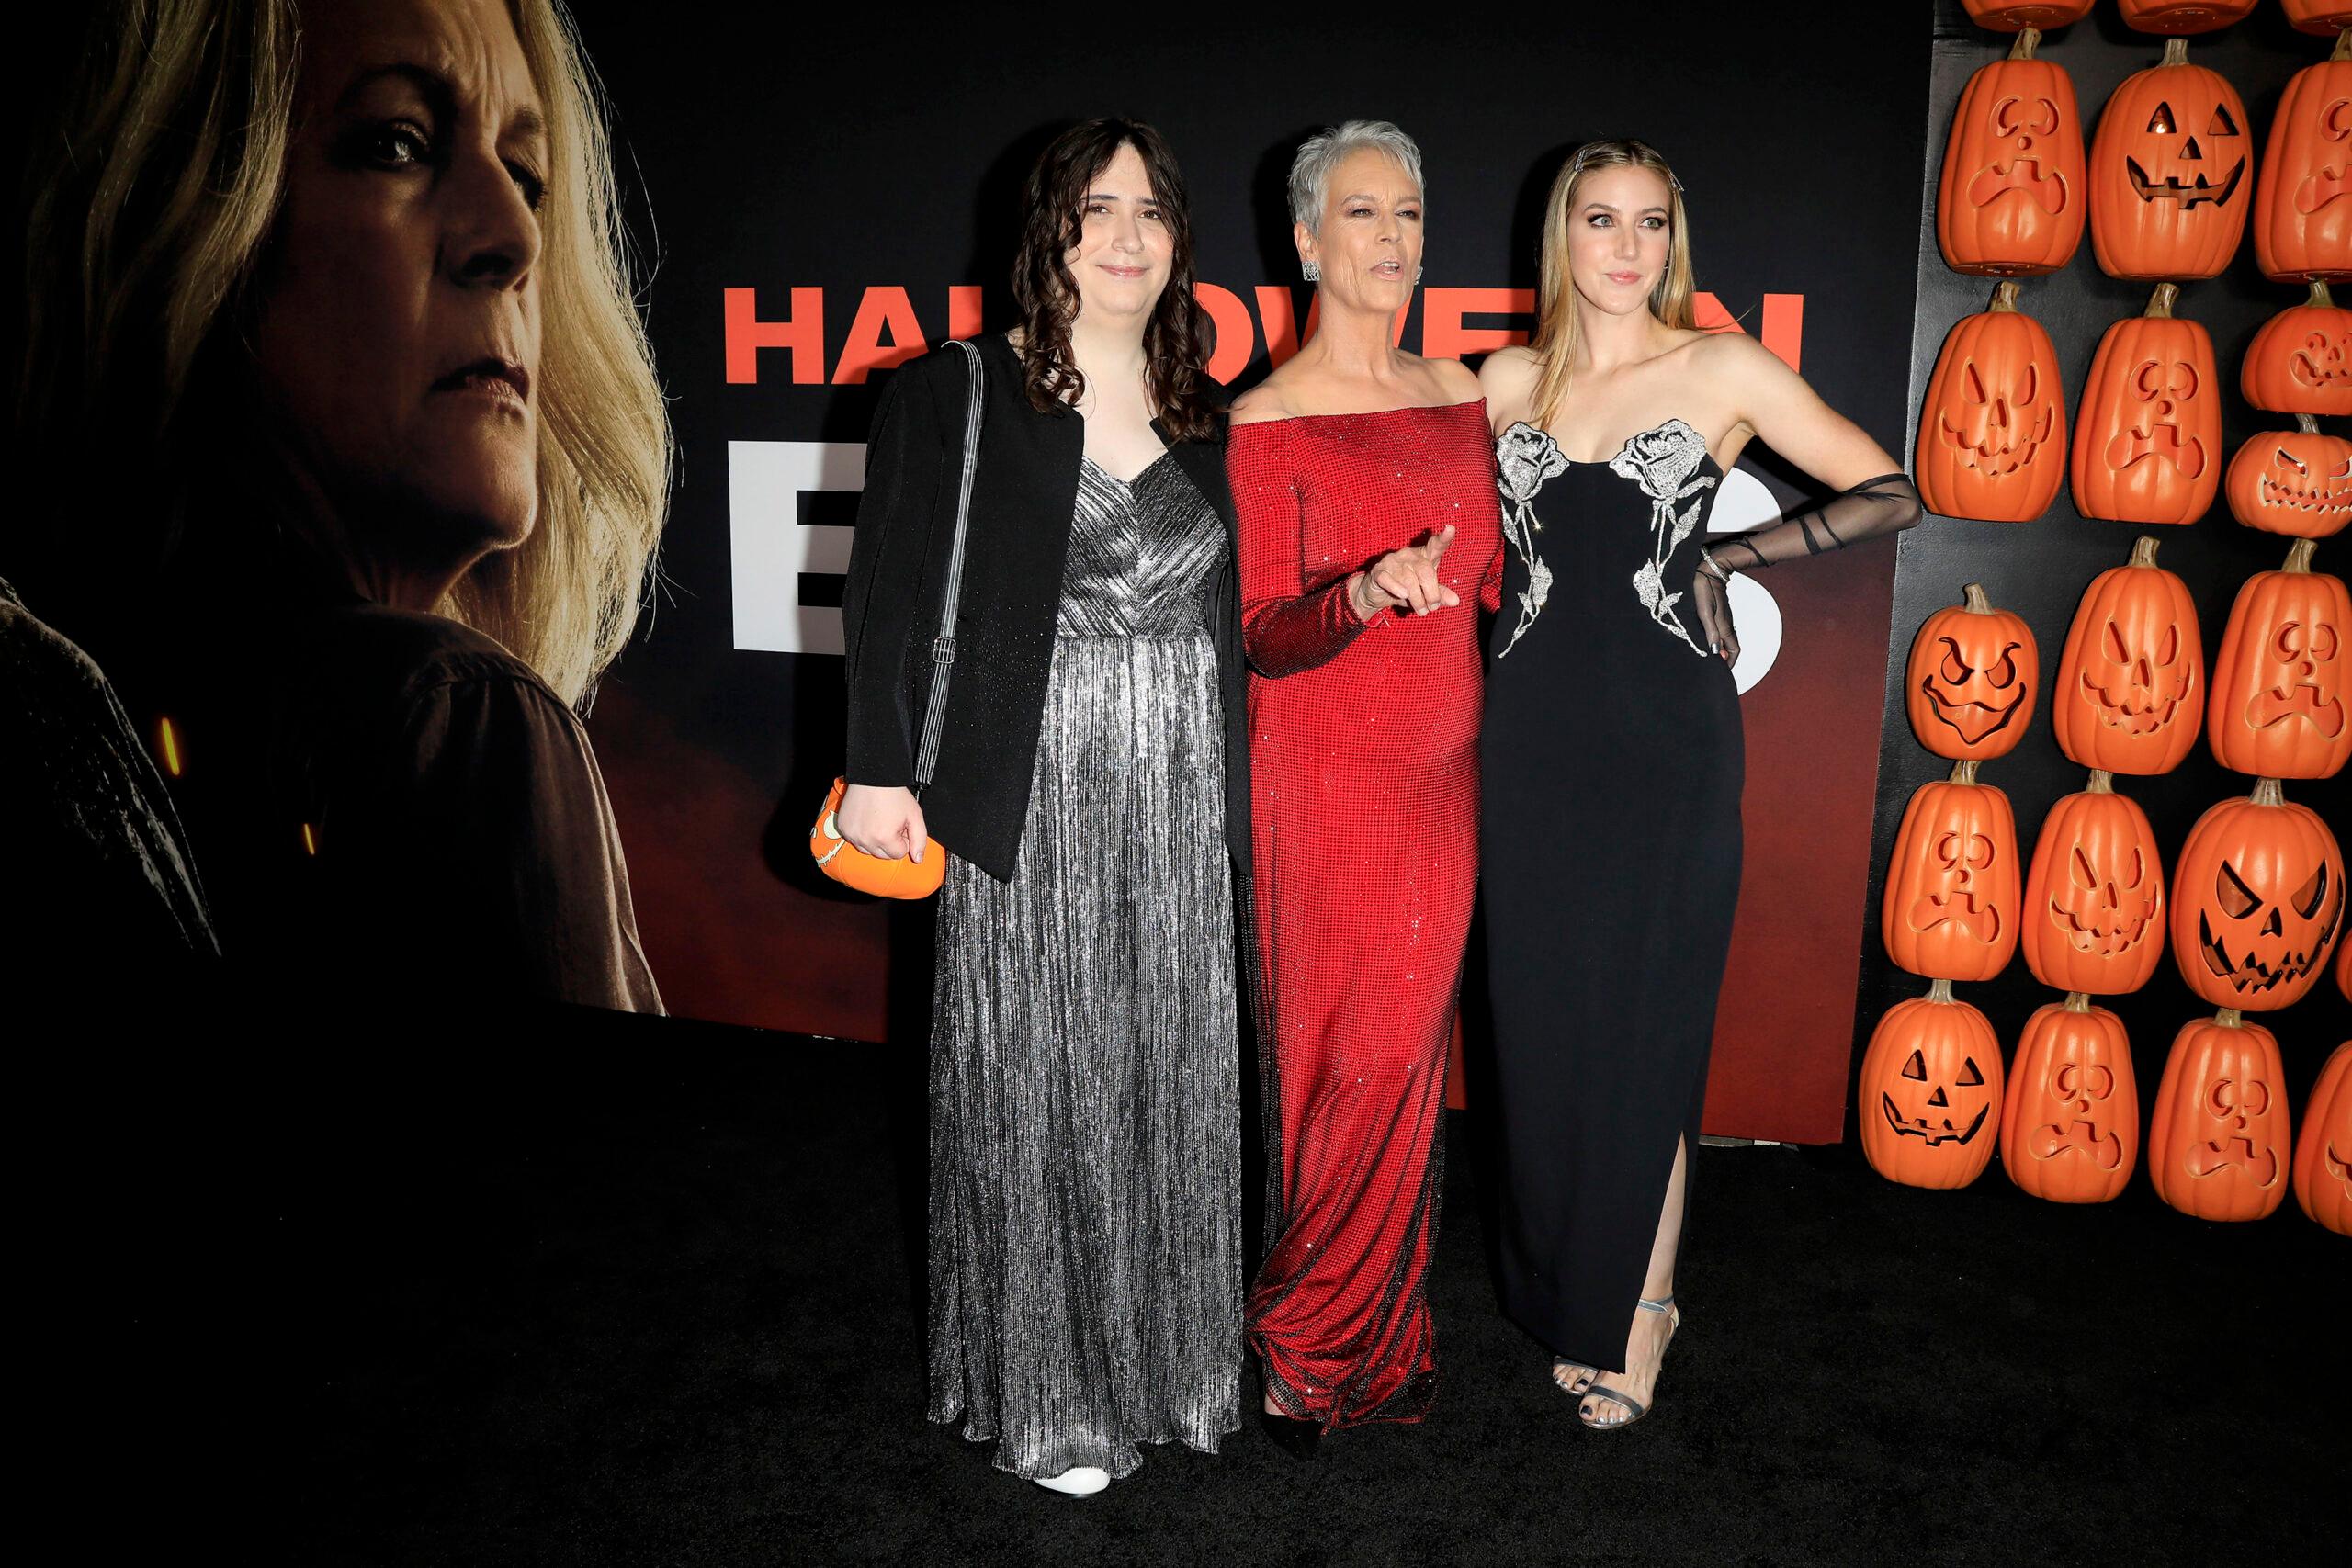 Jamie Lee Curtis with daughters Ruby and Annie Guest.